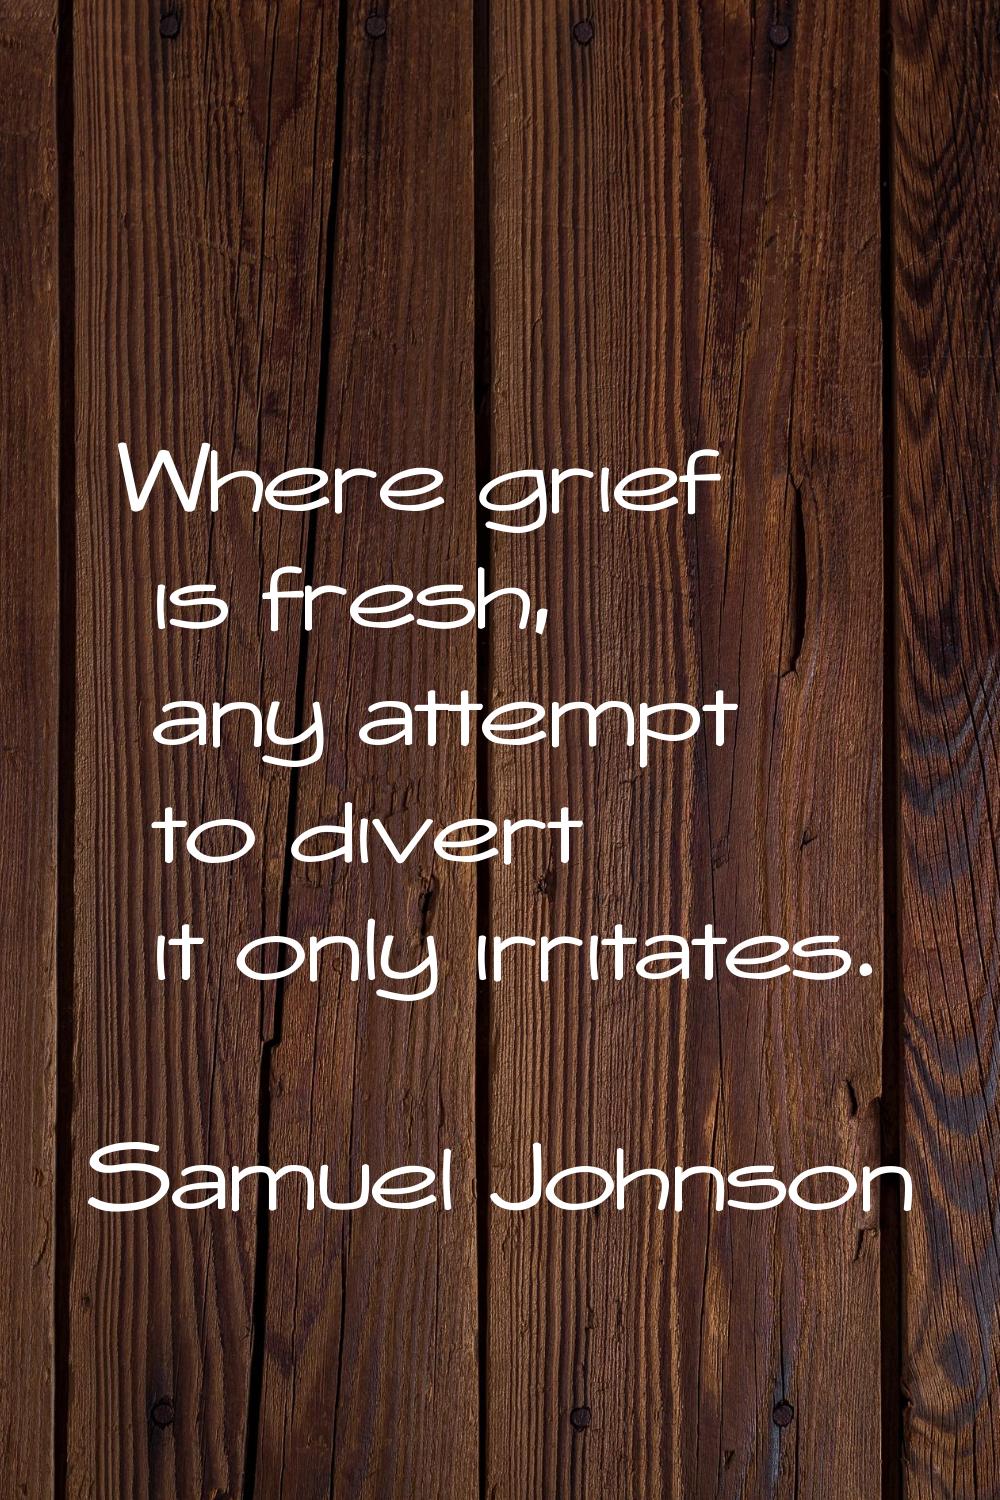 Where grief is fresh, any attempt to divert it only irritates.